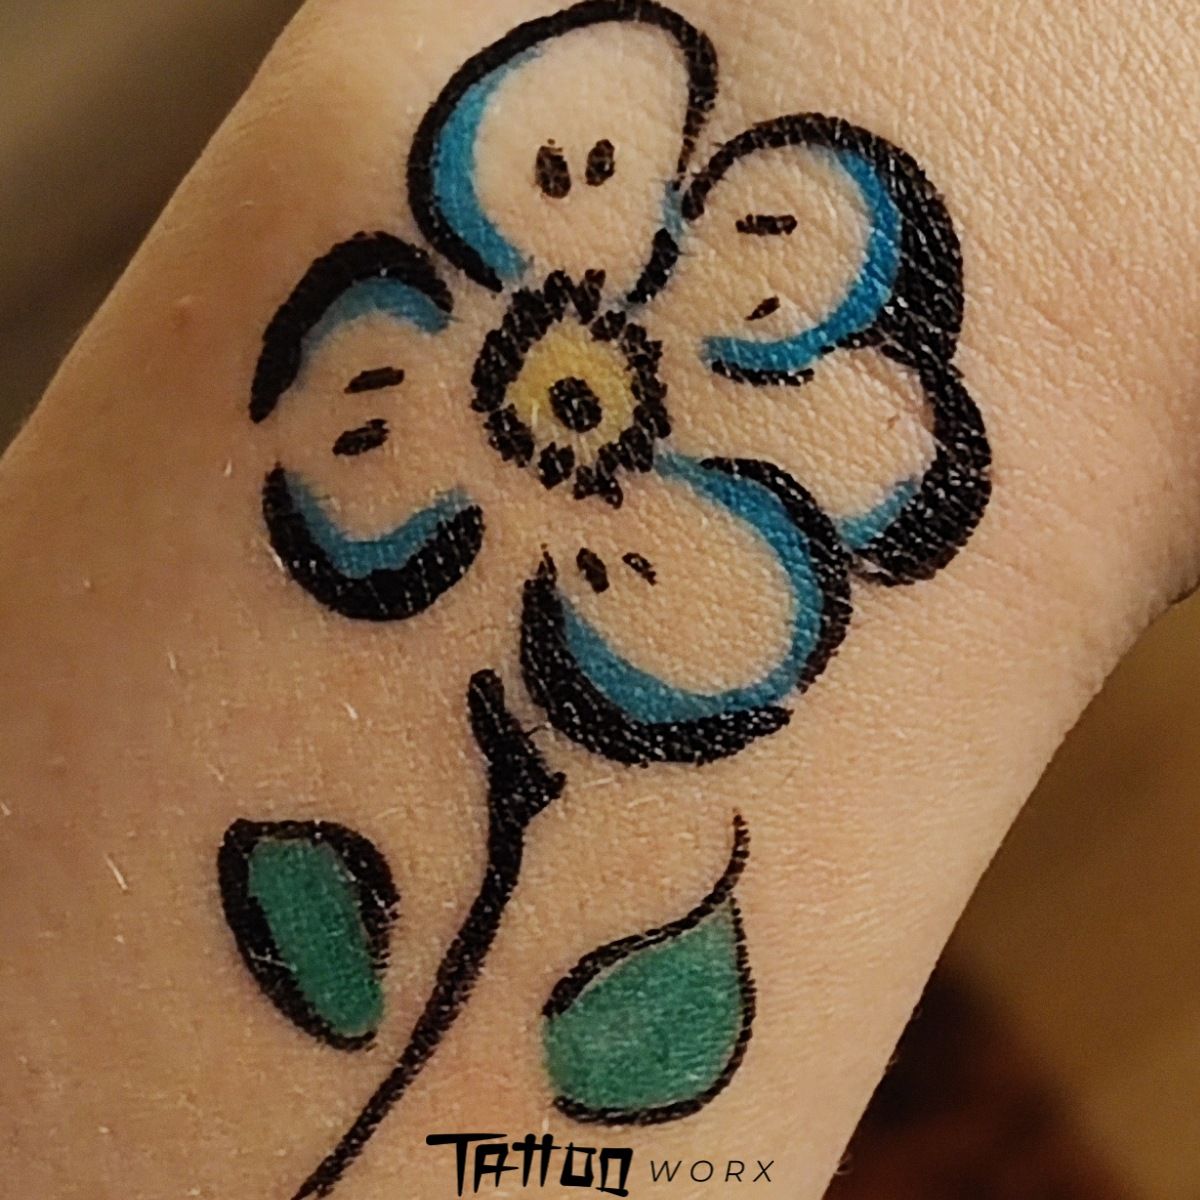 forget me not flower meaning tattoo